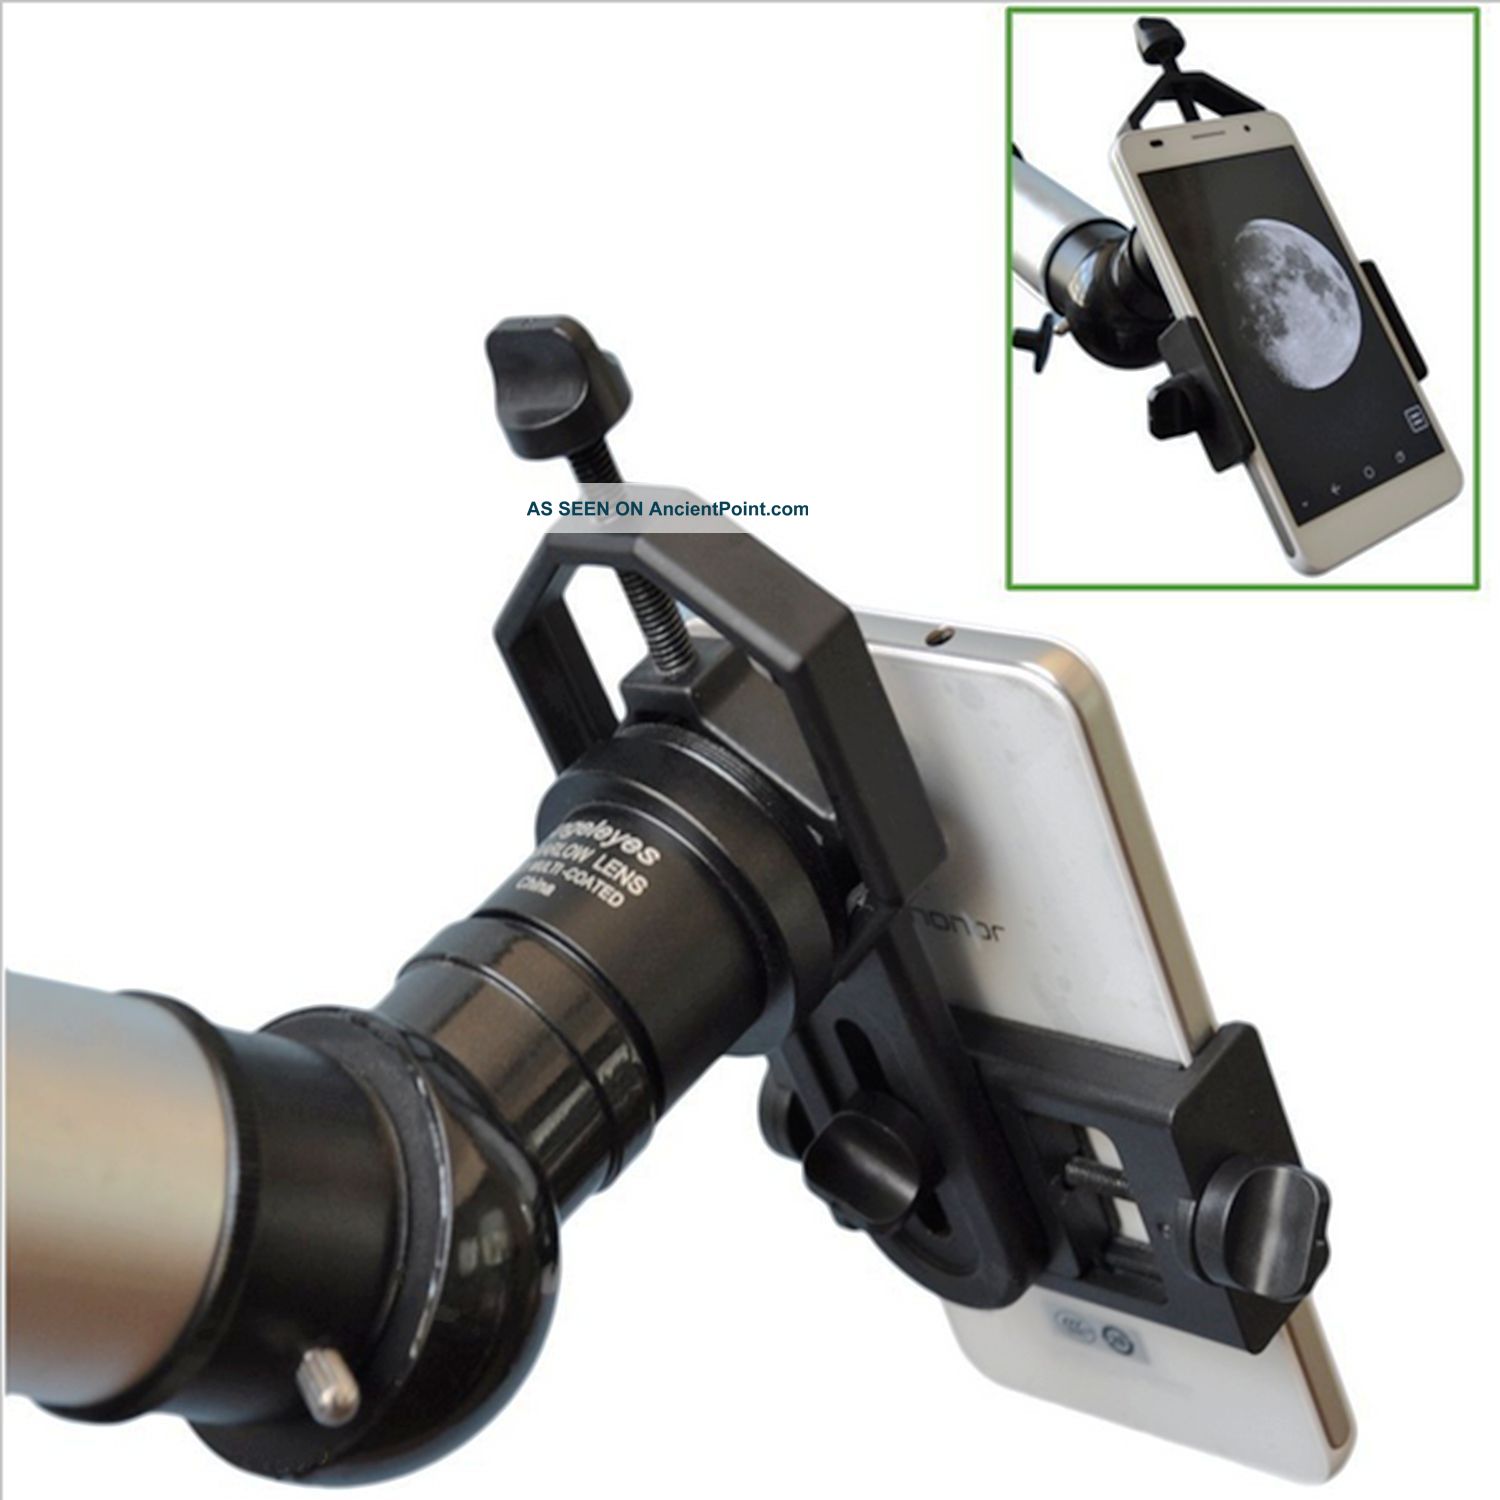 Astromania Universal Cell Phone Adapter Mount Support Telescope And Microscope Telescopes photo